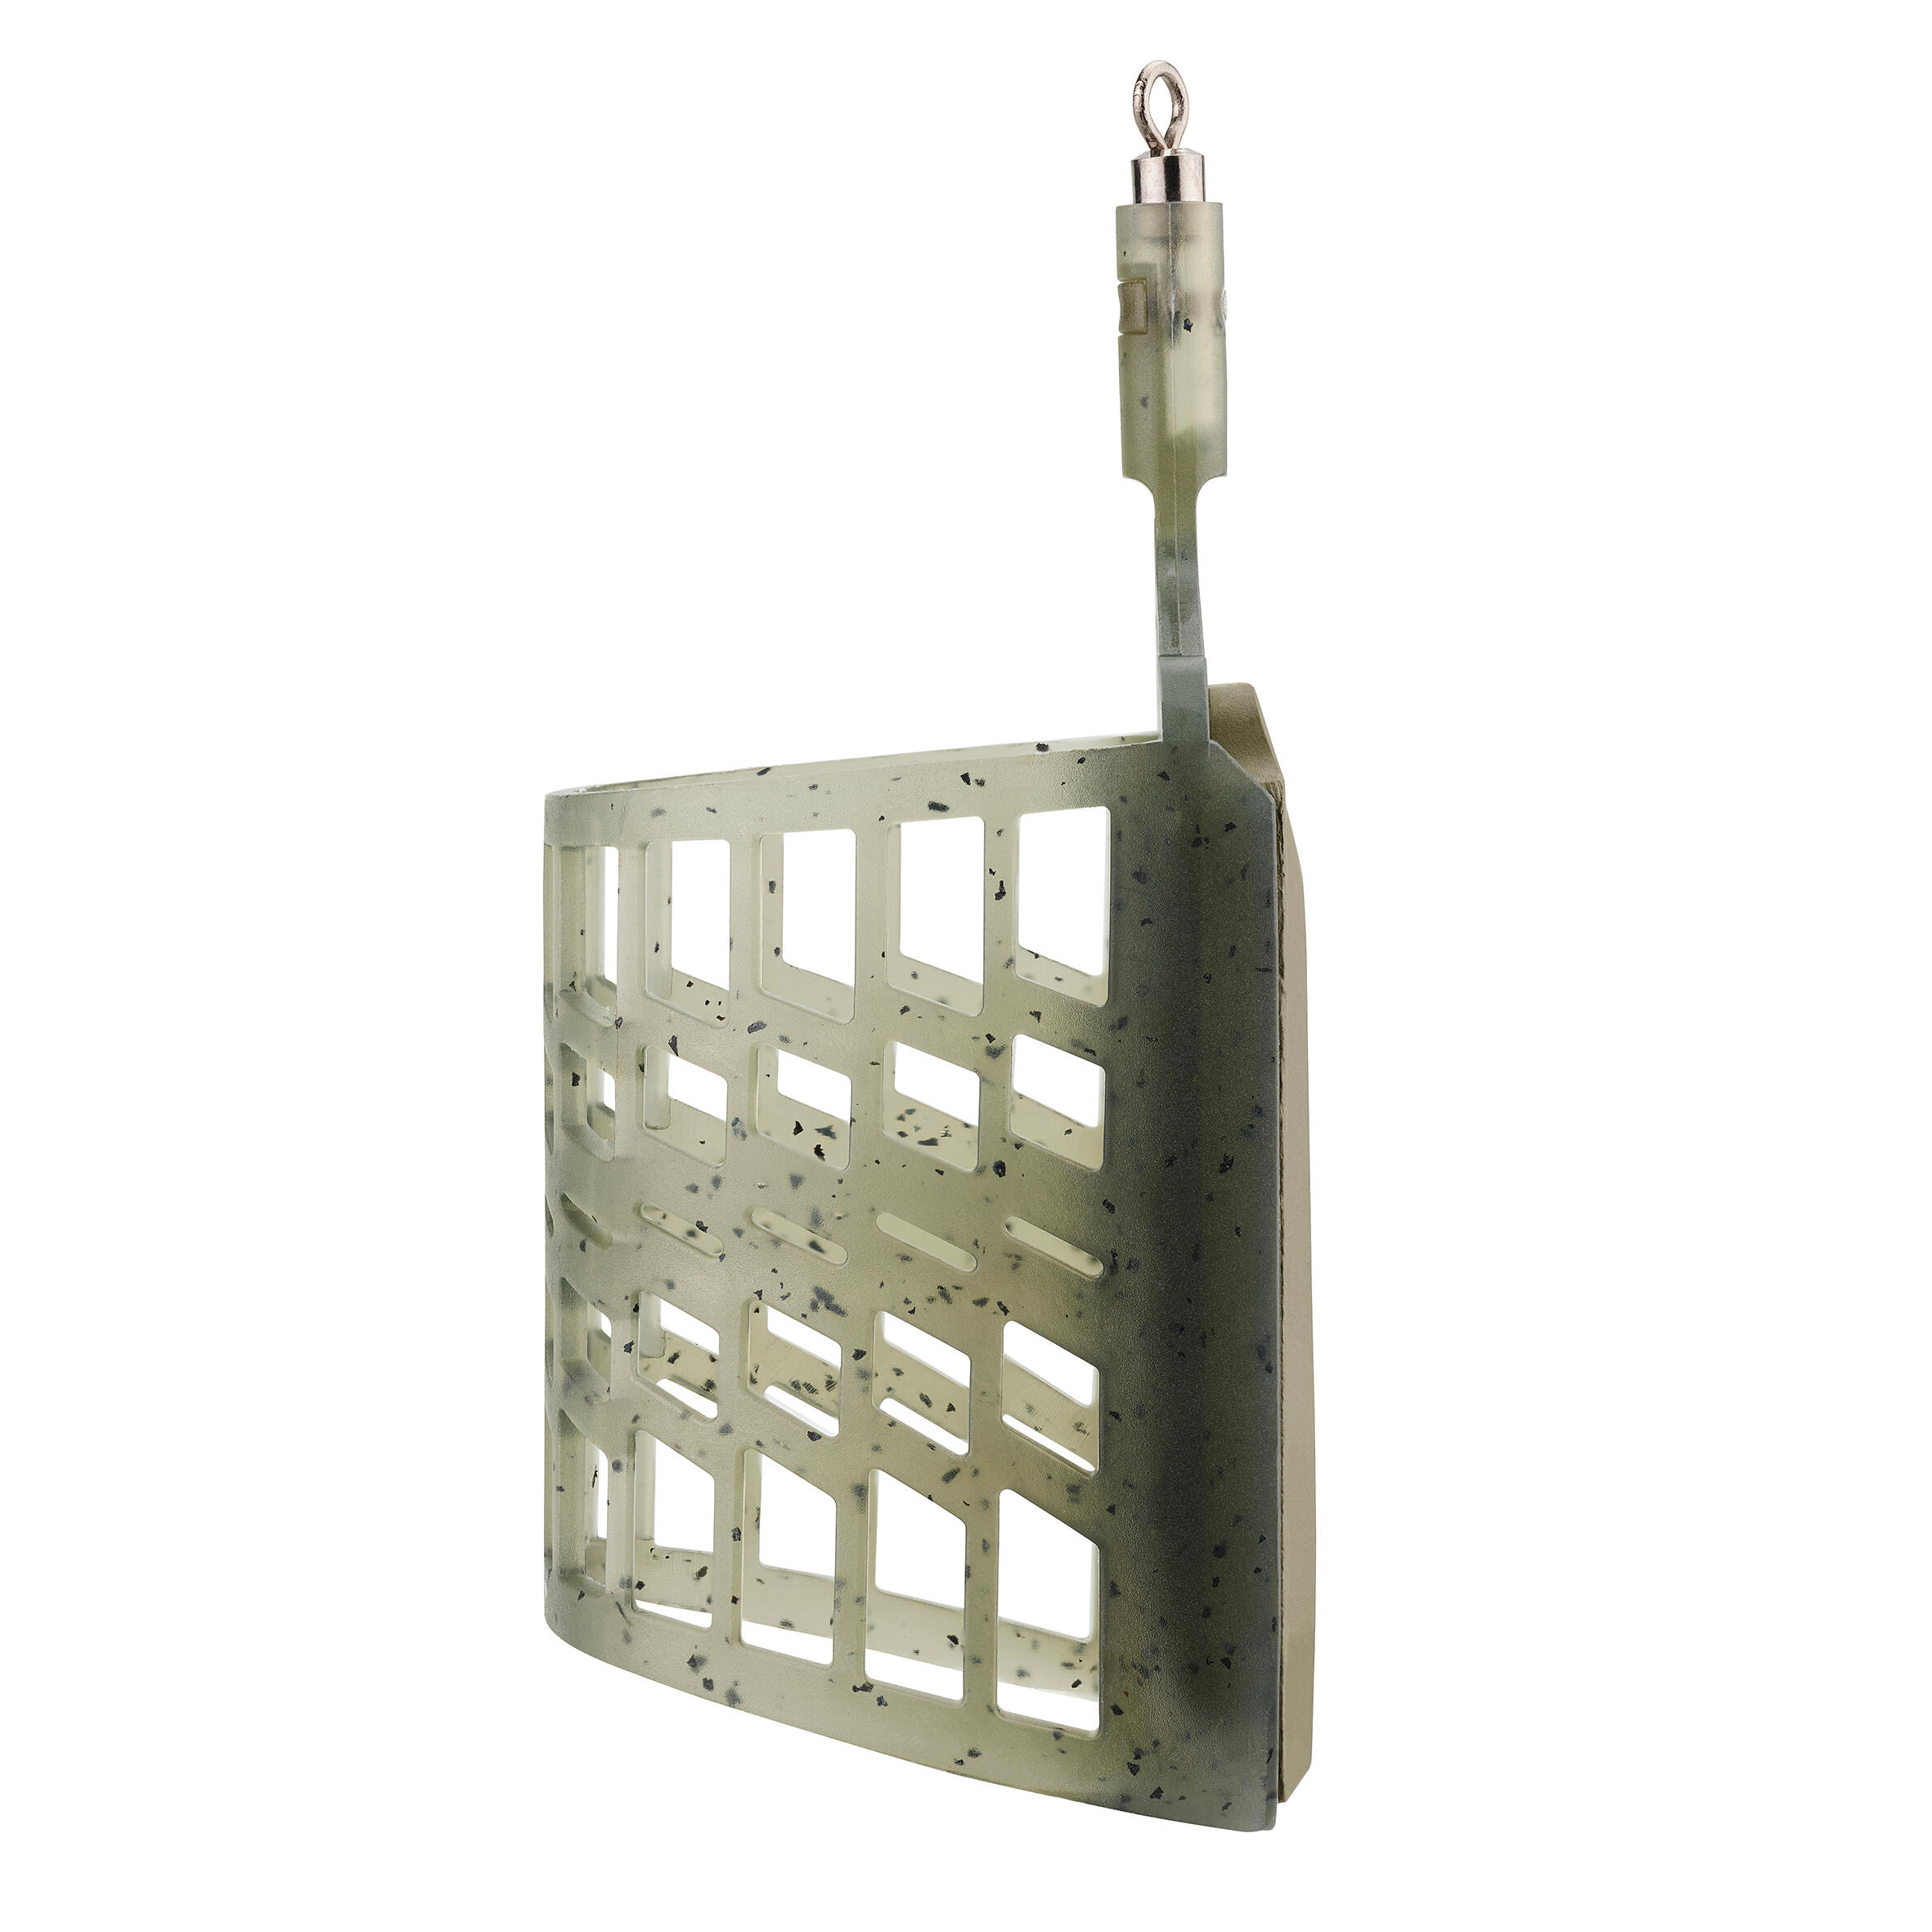 Size large open cage feeder for feeder fishing, FEEDER - SO - L. CAPERLAN